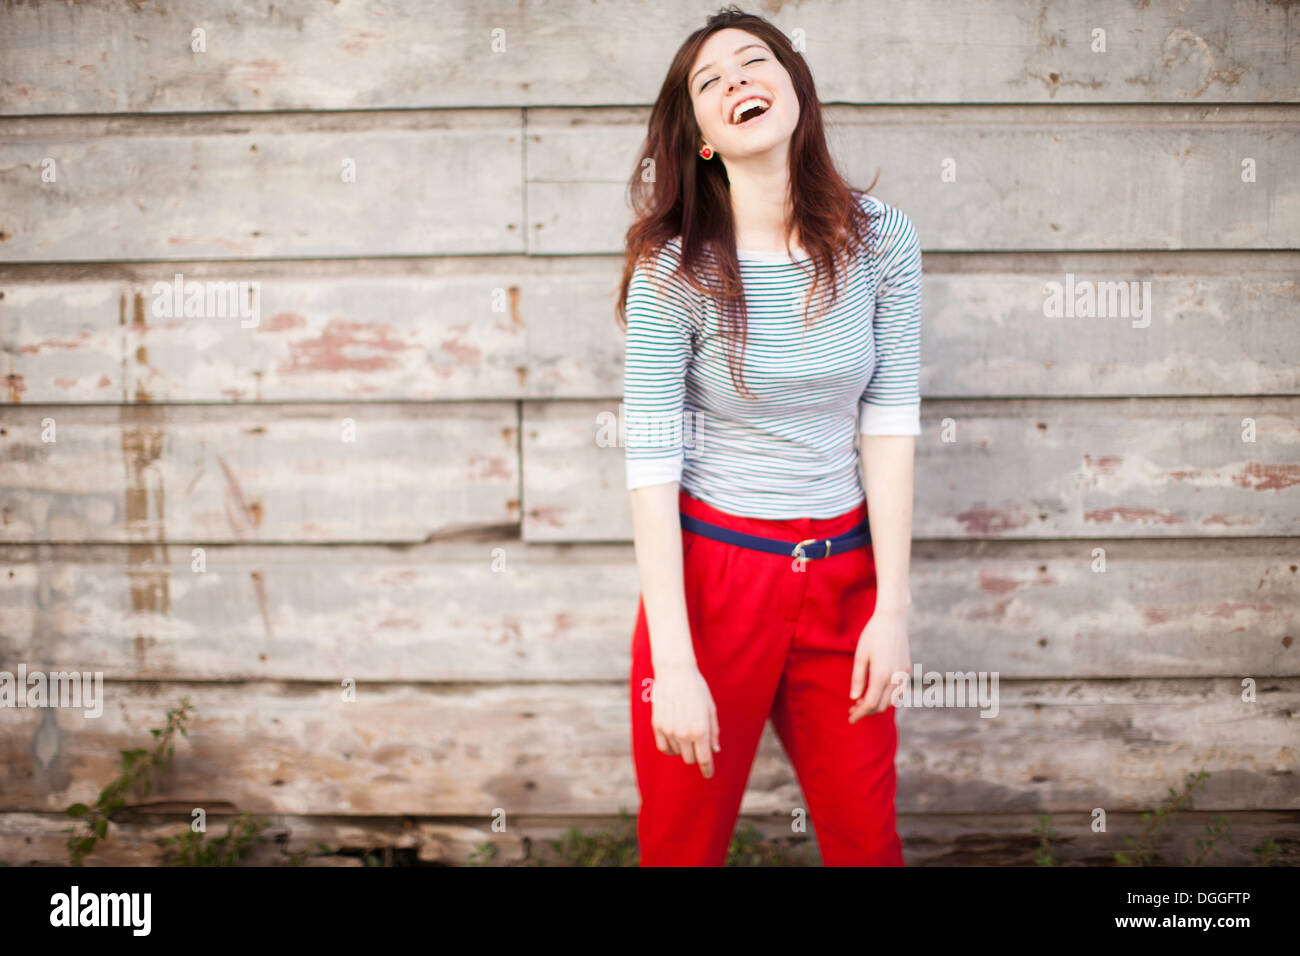 Portrait of young woman laughing Stock Photo